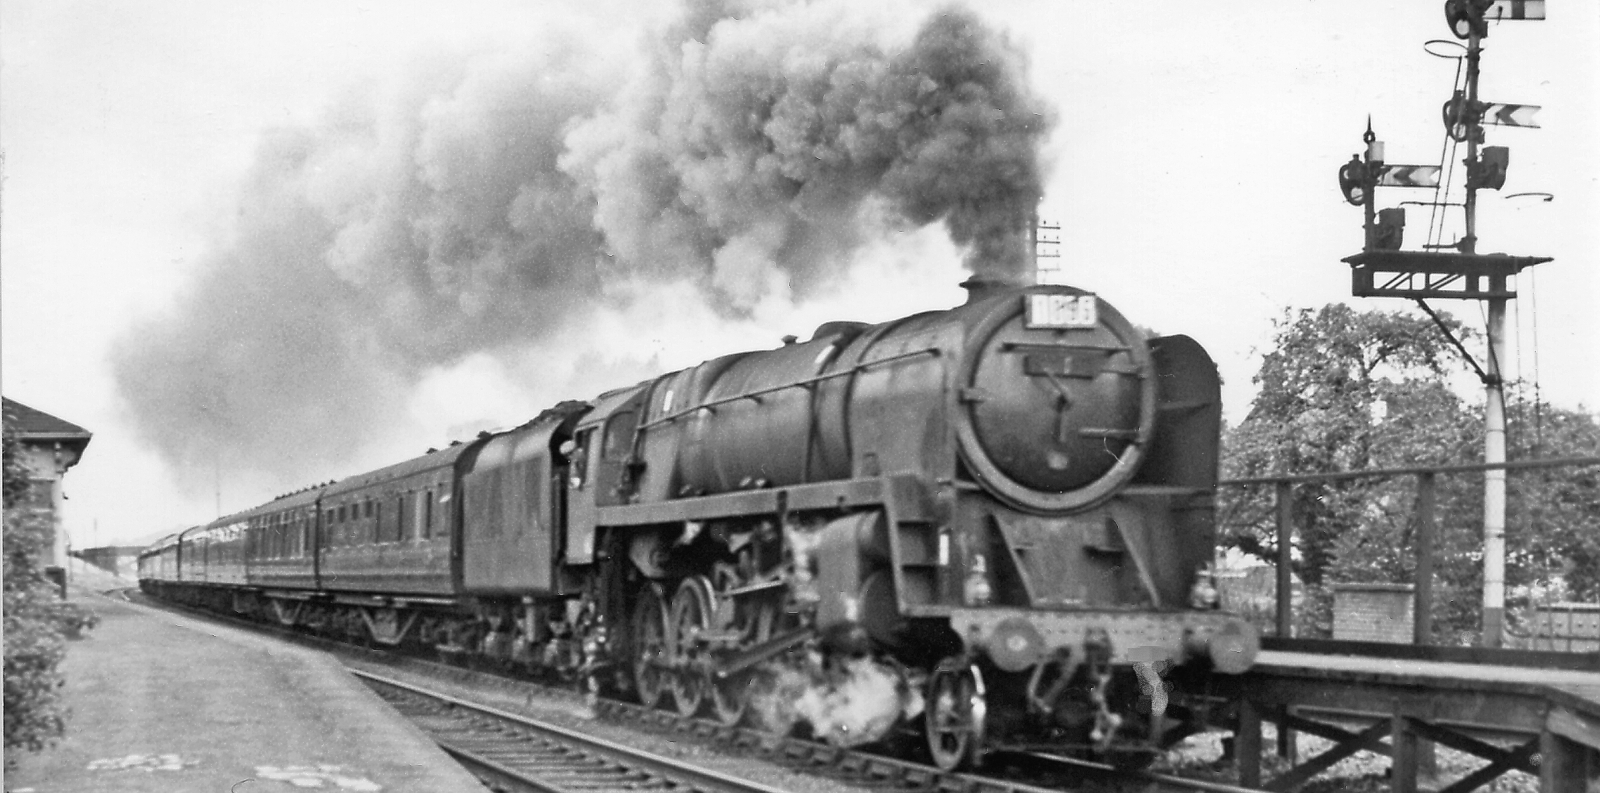 No. 92151 in July 1961 in front of the “Pines Express” at Haresfield, Gloucestershire